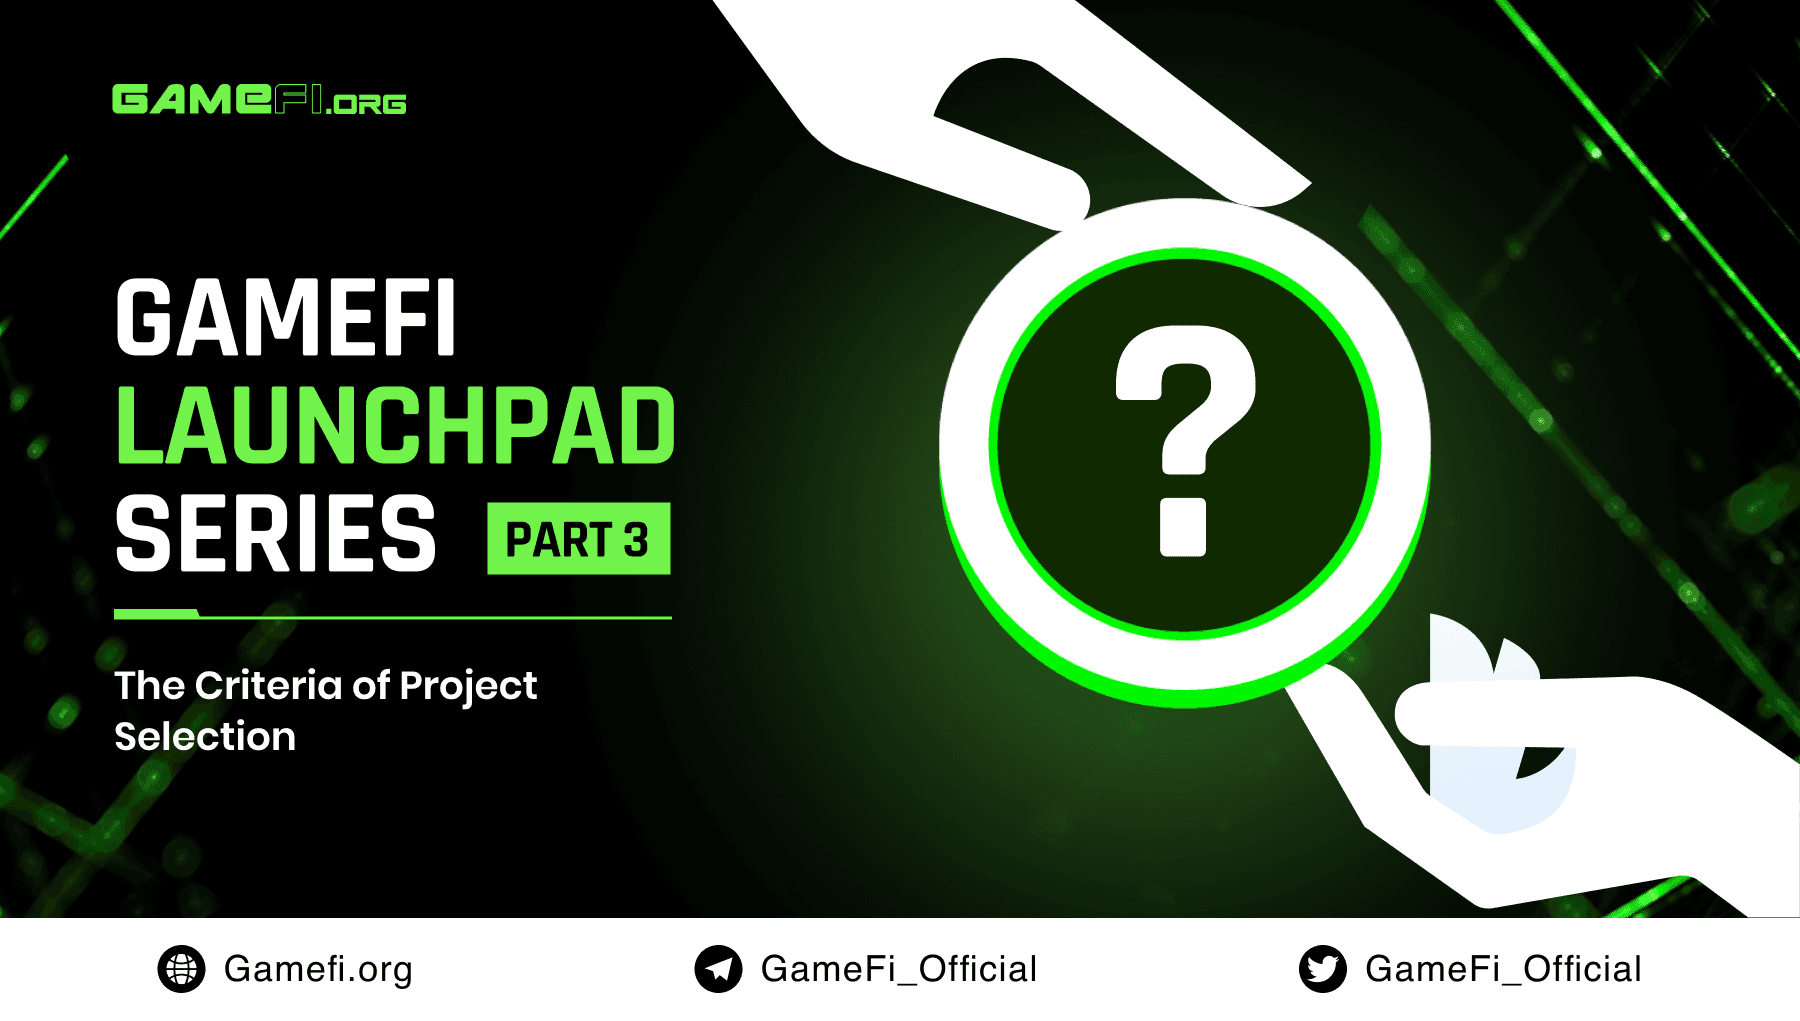 GameFi Launchpad Series - Part 3: The Criteria of Project Selection